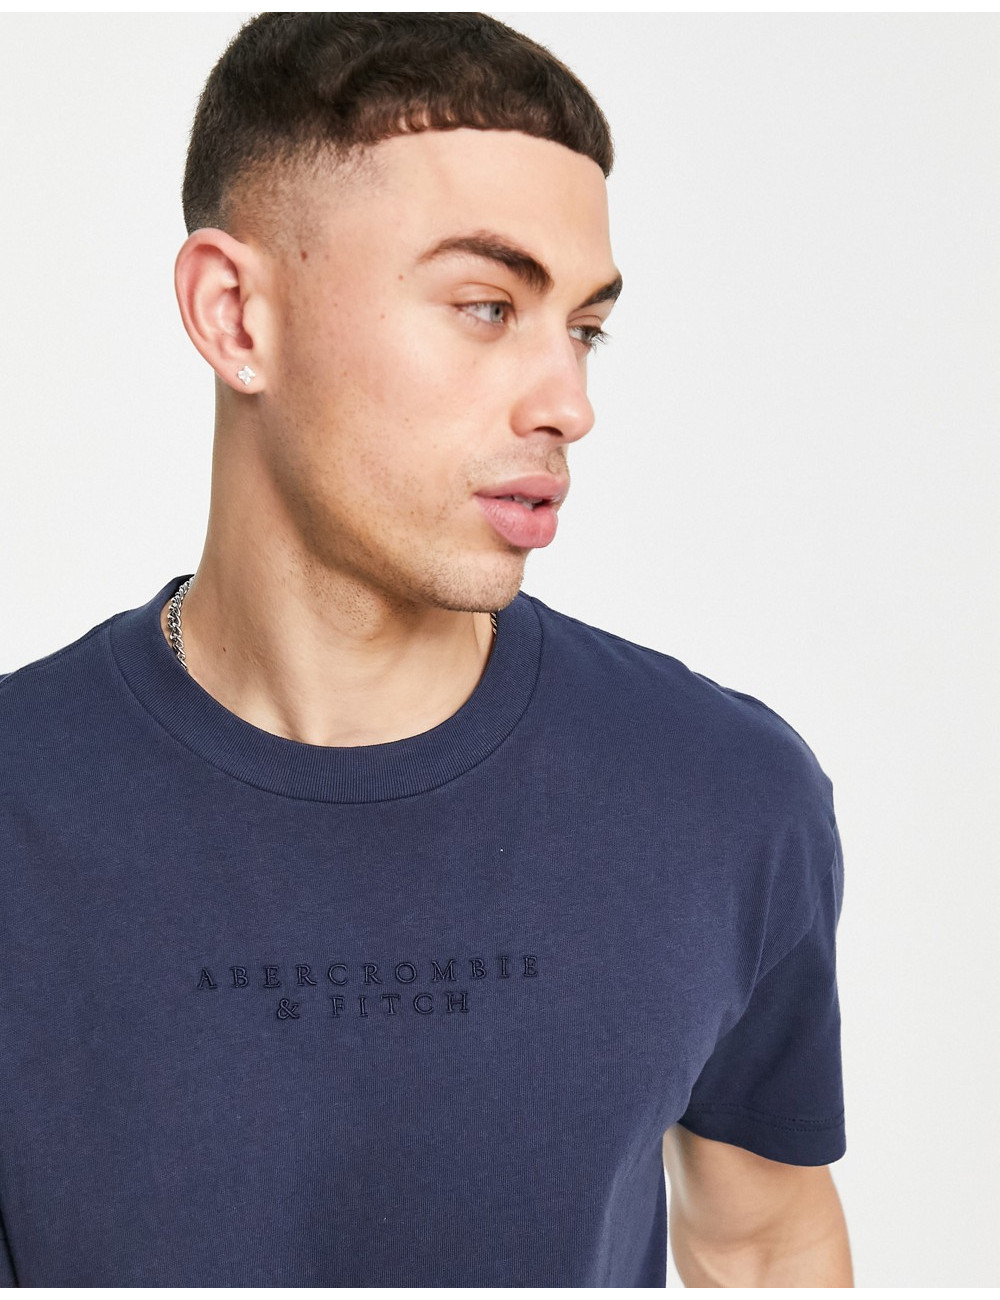 Abercrombie & Fitch small...